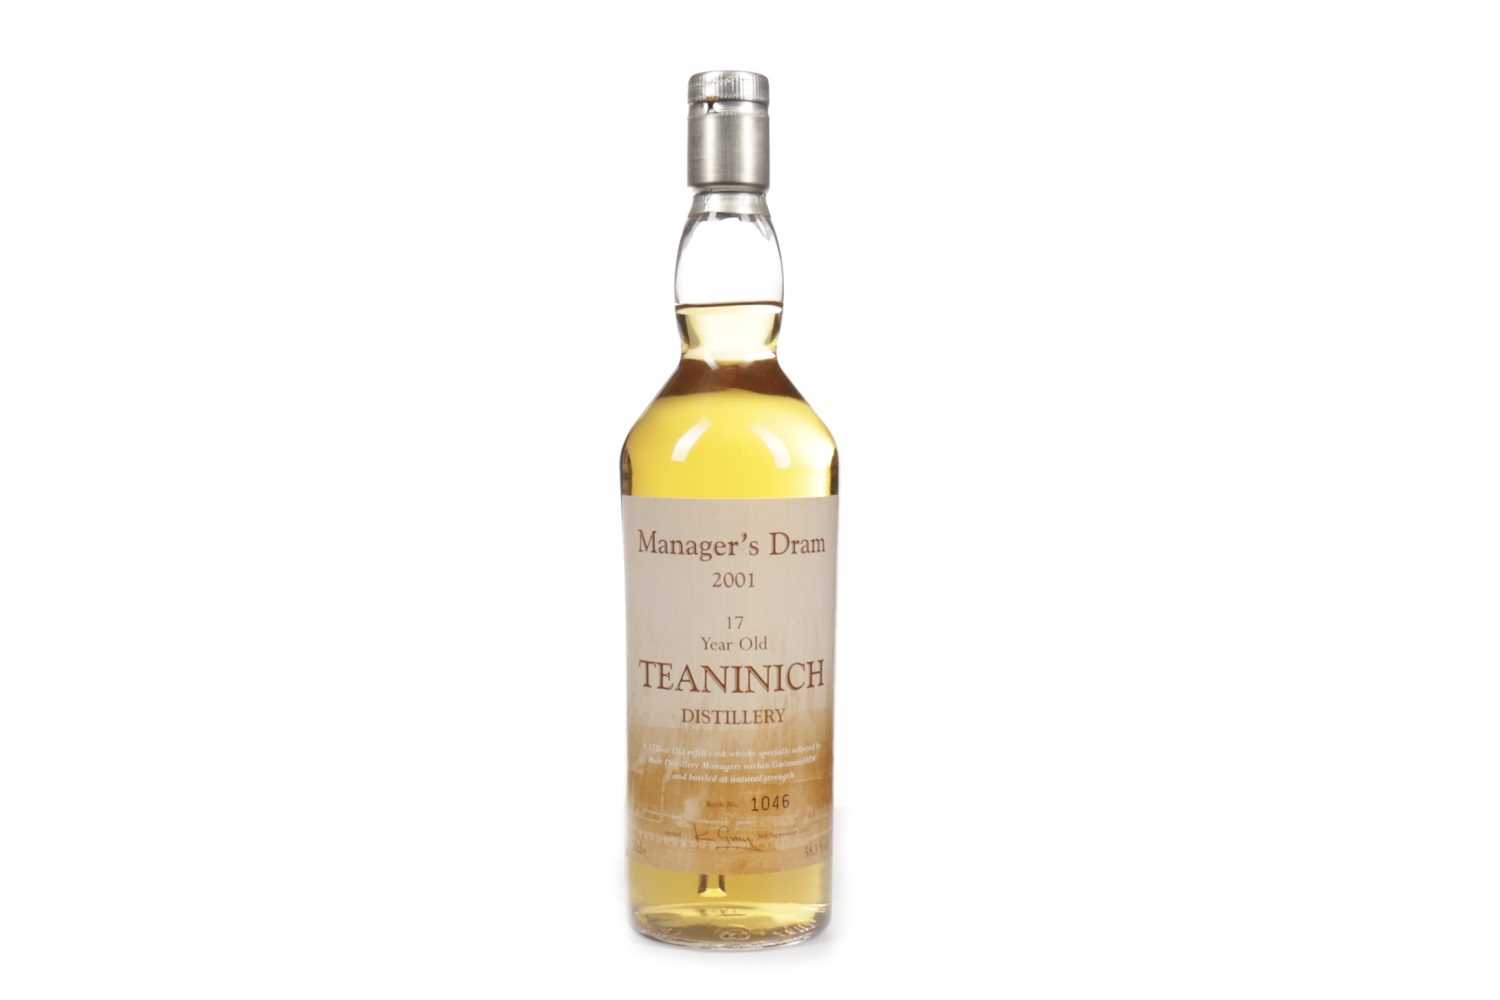 Lot 106 - TEANINICH THE MANAGER'S DRAM AGED 17 YEARS